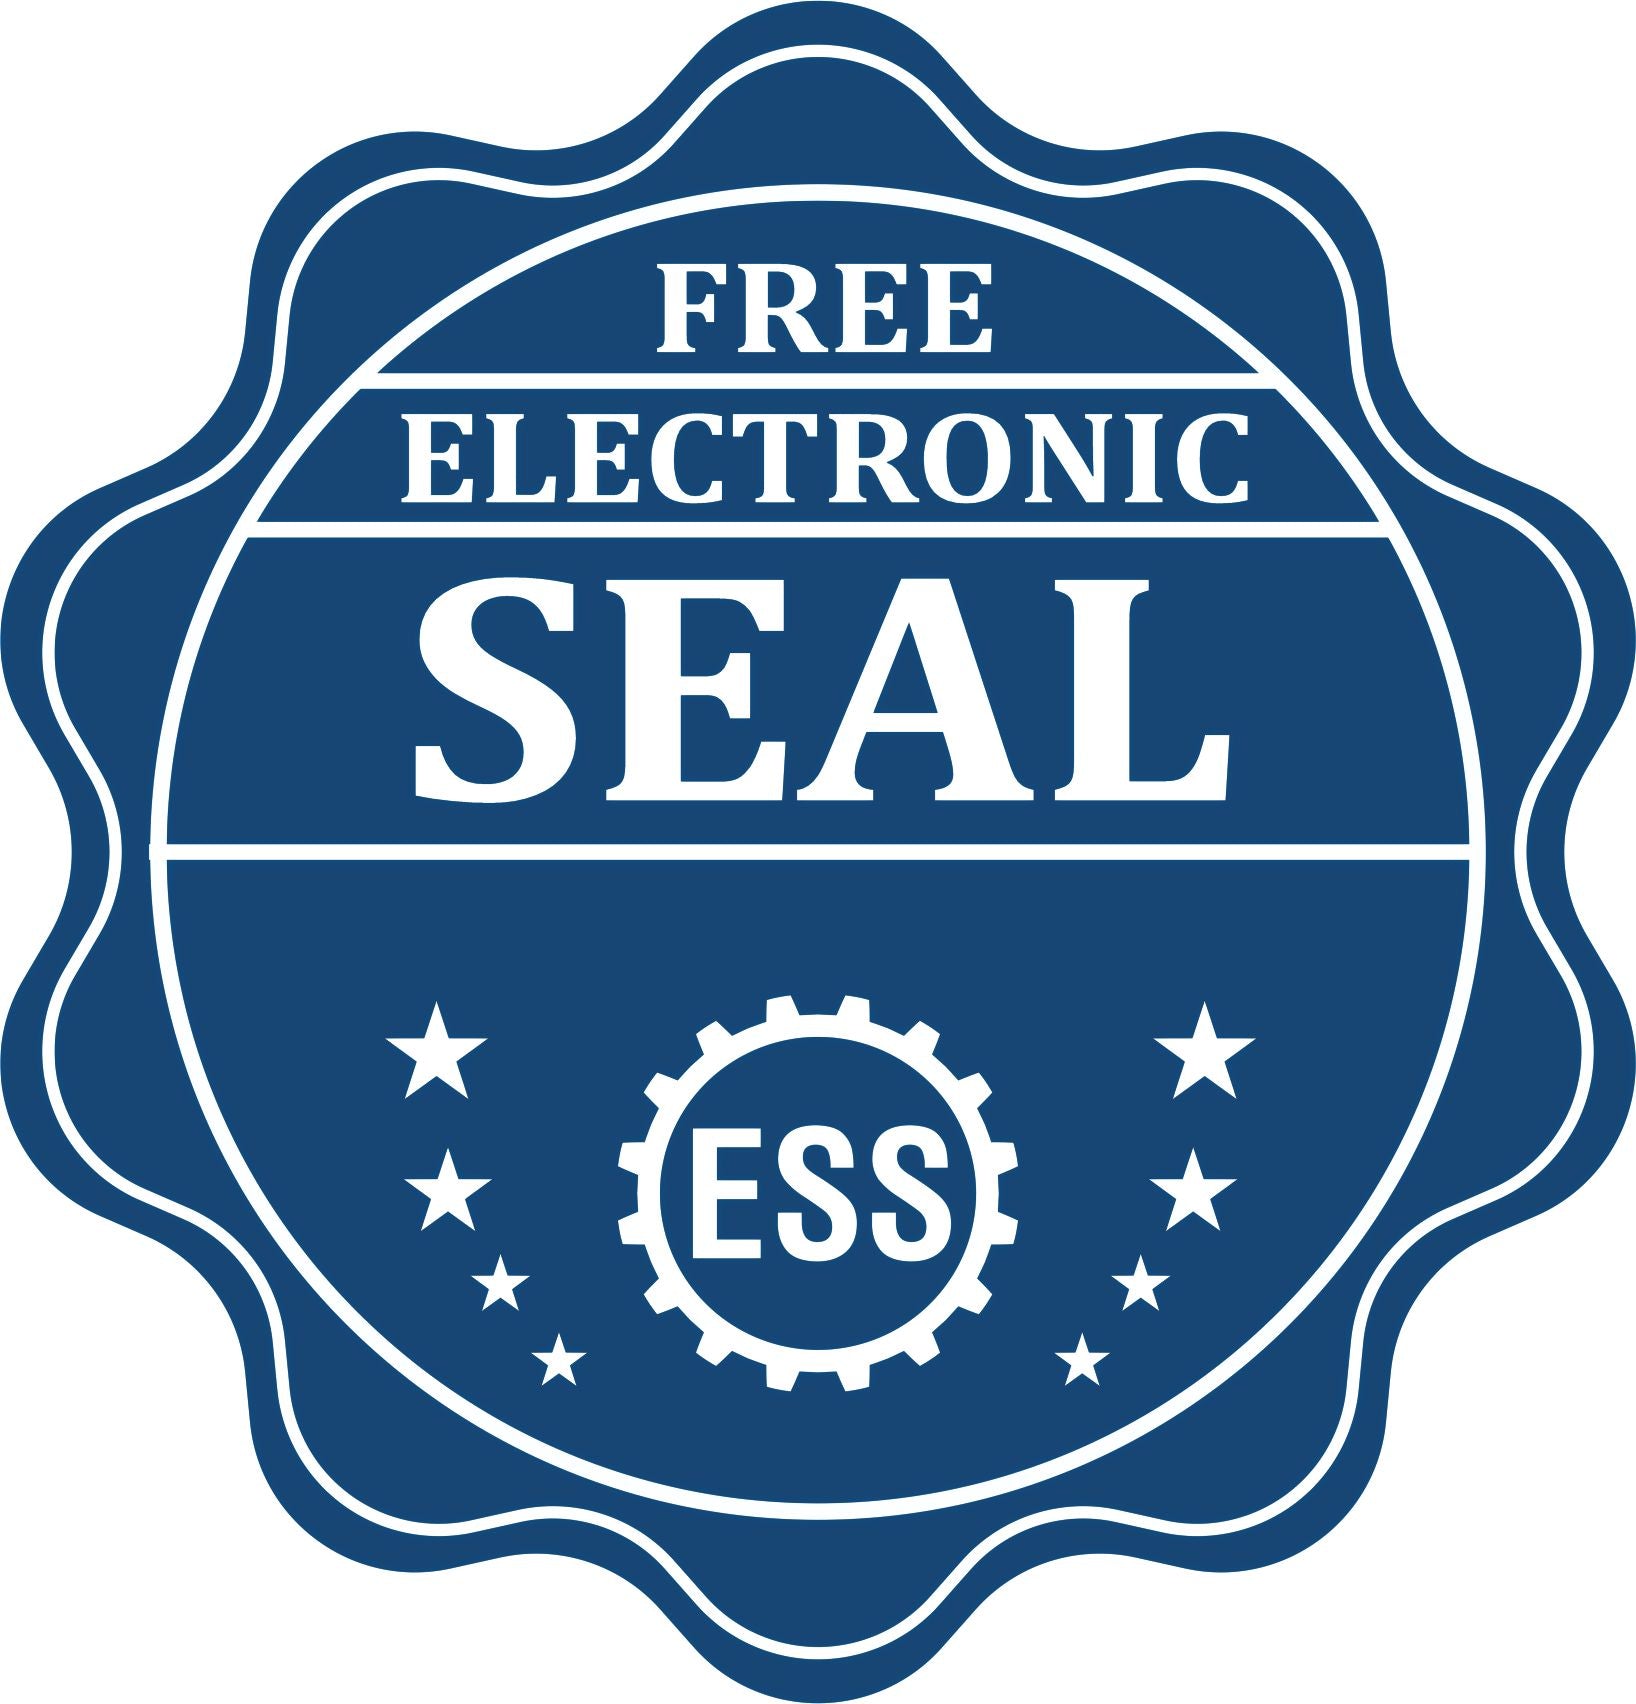 A badge showing a free electronic seal for the North Dakota Engineer Desk Seal with stars and the ESS gear on the emblem.